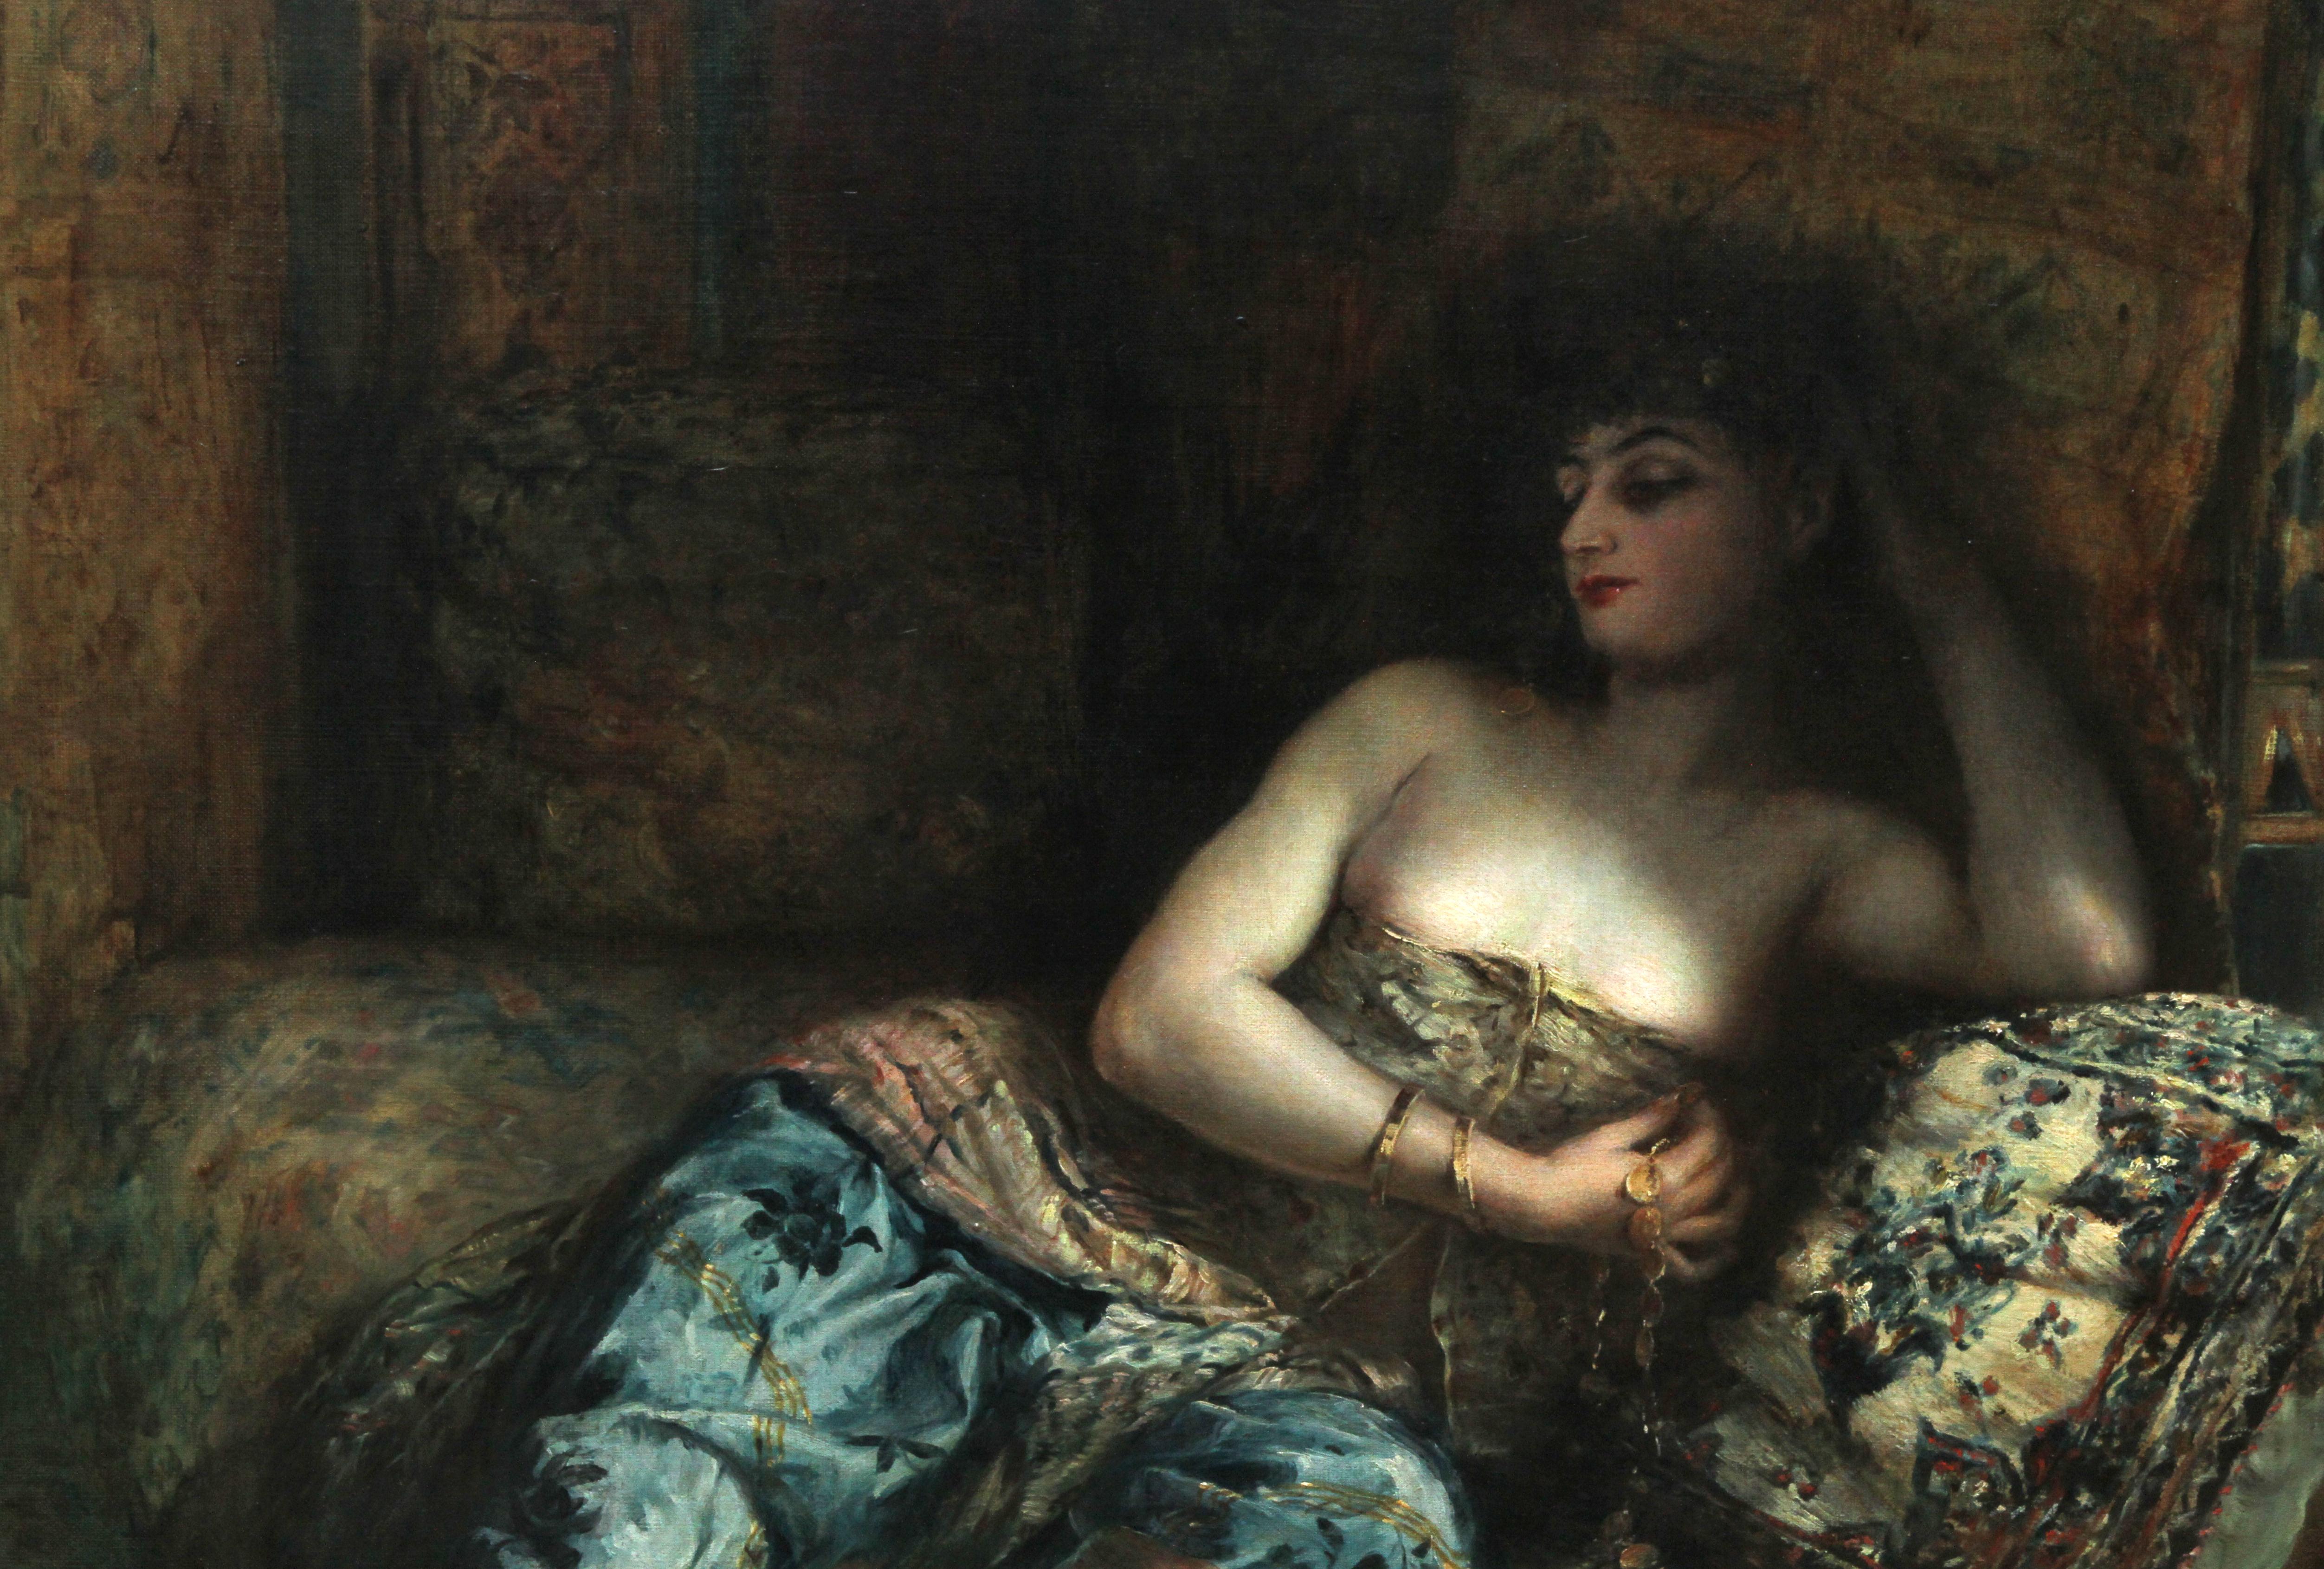 This charming ex Christie's Victorian Orientalist oil painting is by noted French exhibited artist Lucien Laurent Gsell. The painting dates to around 1900 and portrays a beautiful young woman reclining on a couch. The painting is entitled in French